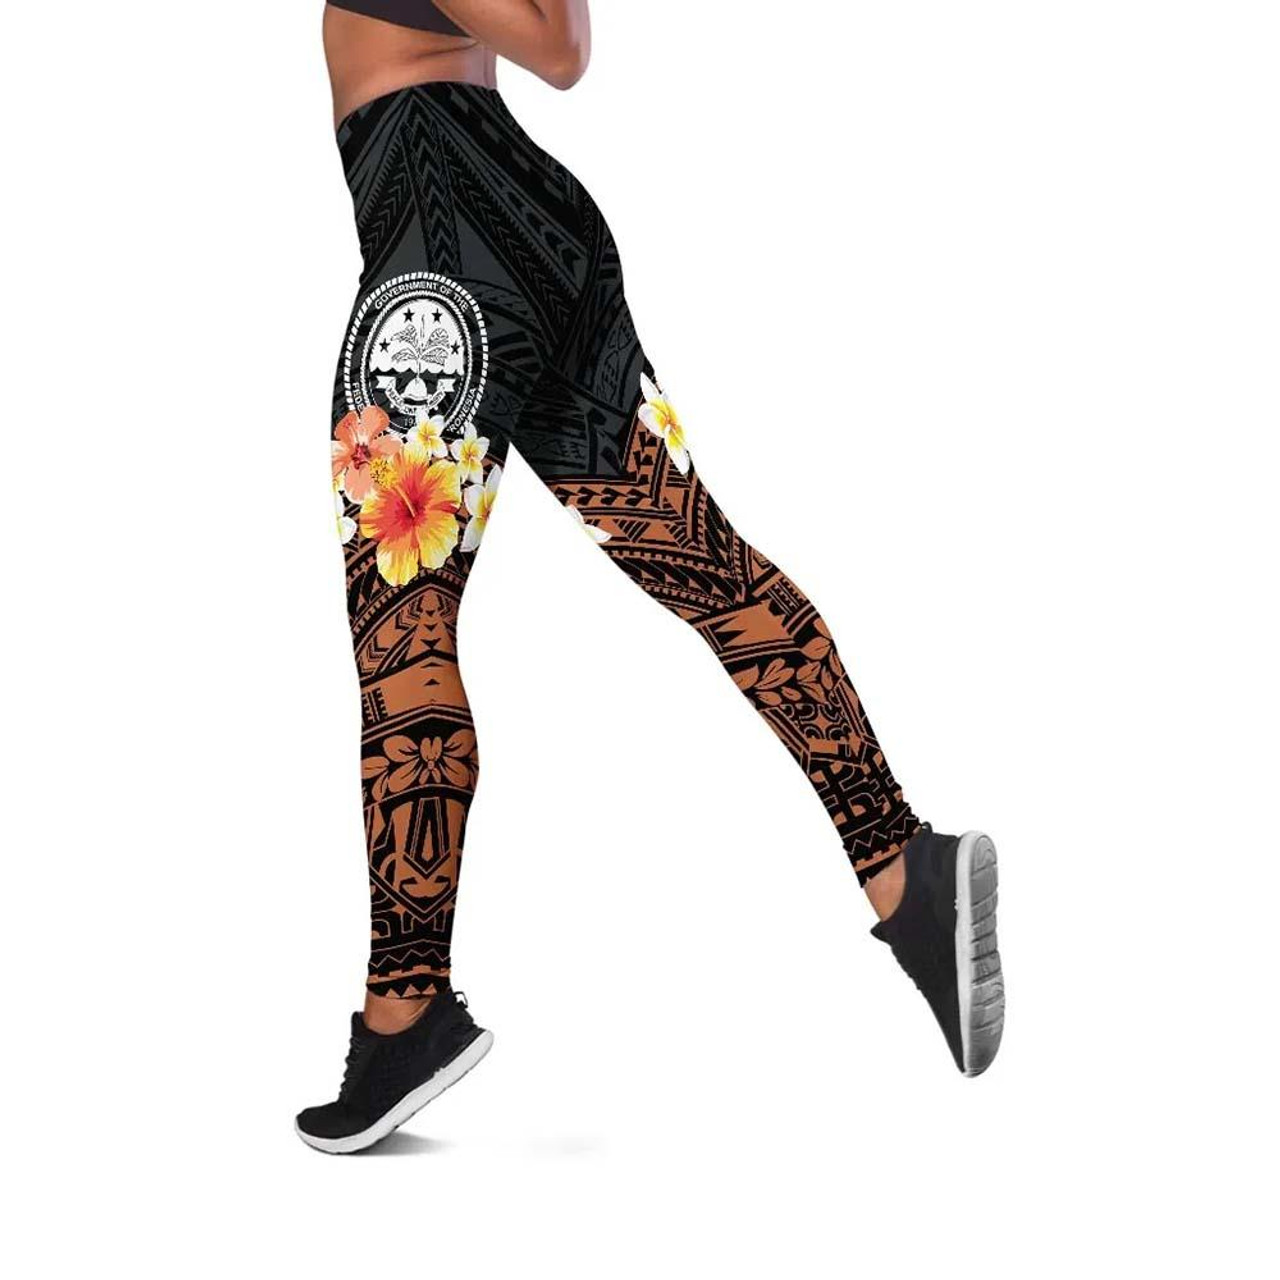 Federated States of Micronesia Legging - Tribal Pattern Hibiscus 1